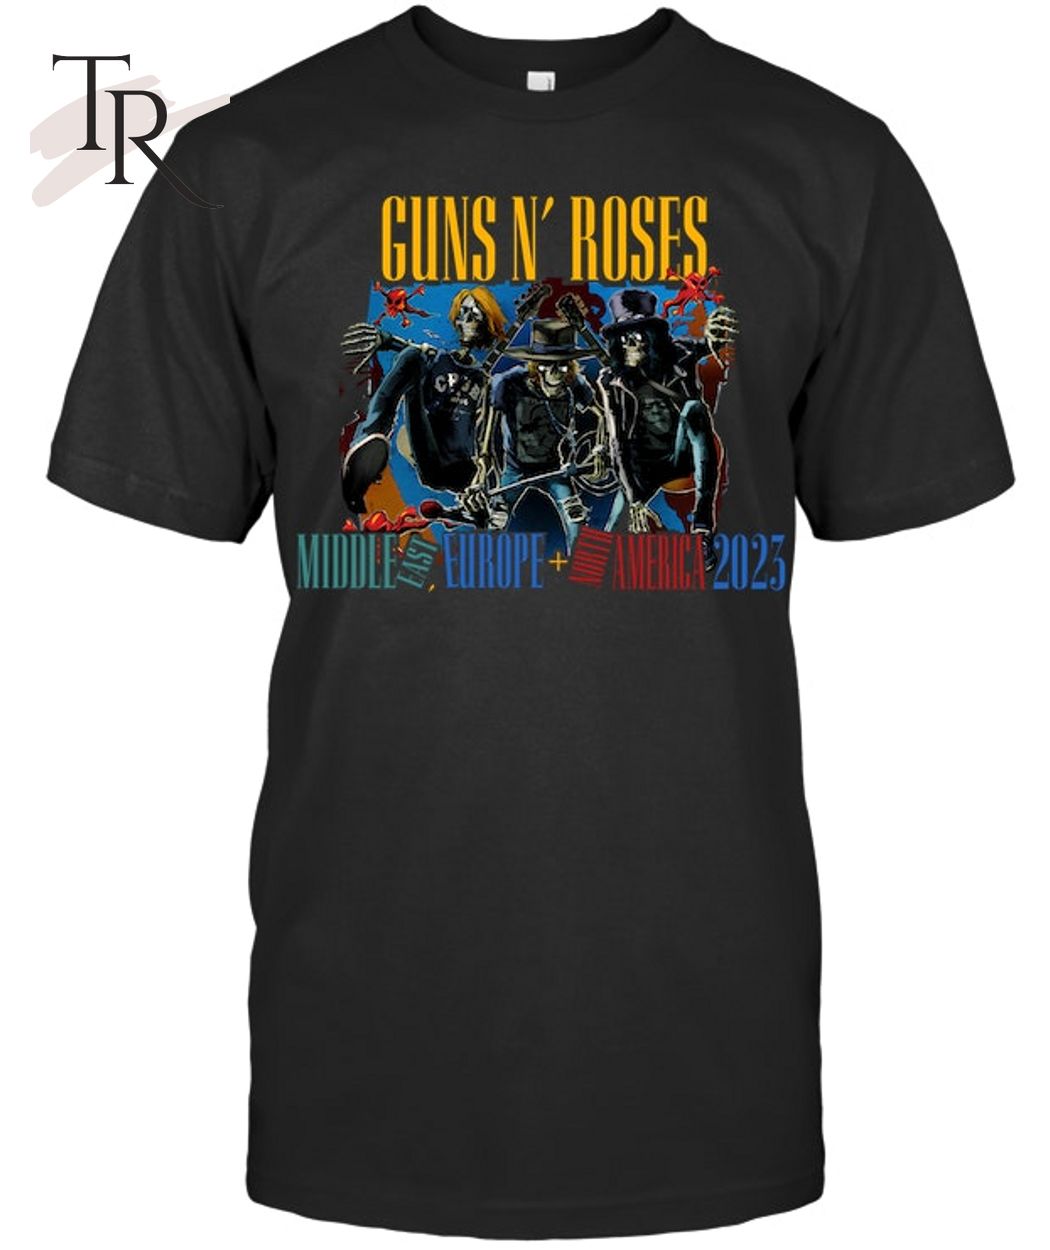 The 2023 World Tour Guns N' Roses Unisex T-Shirt - Limited Edition